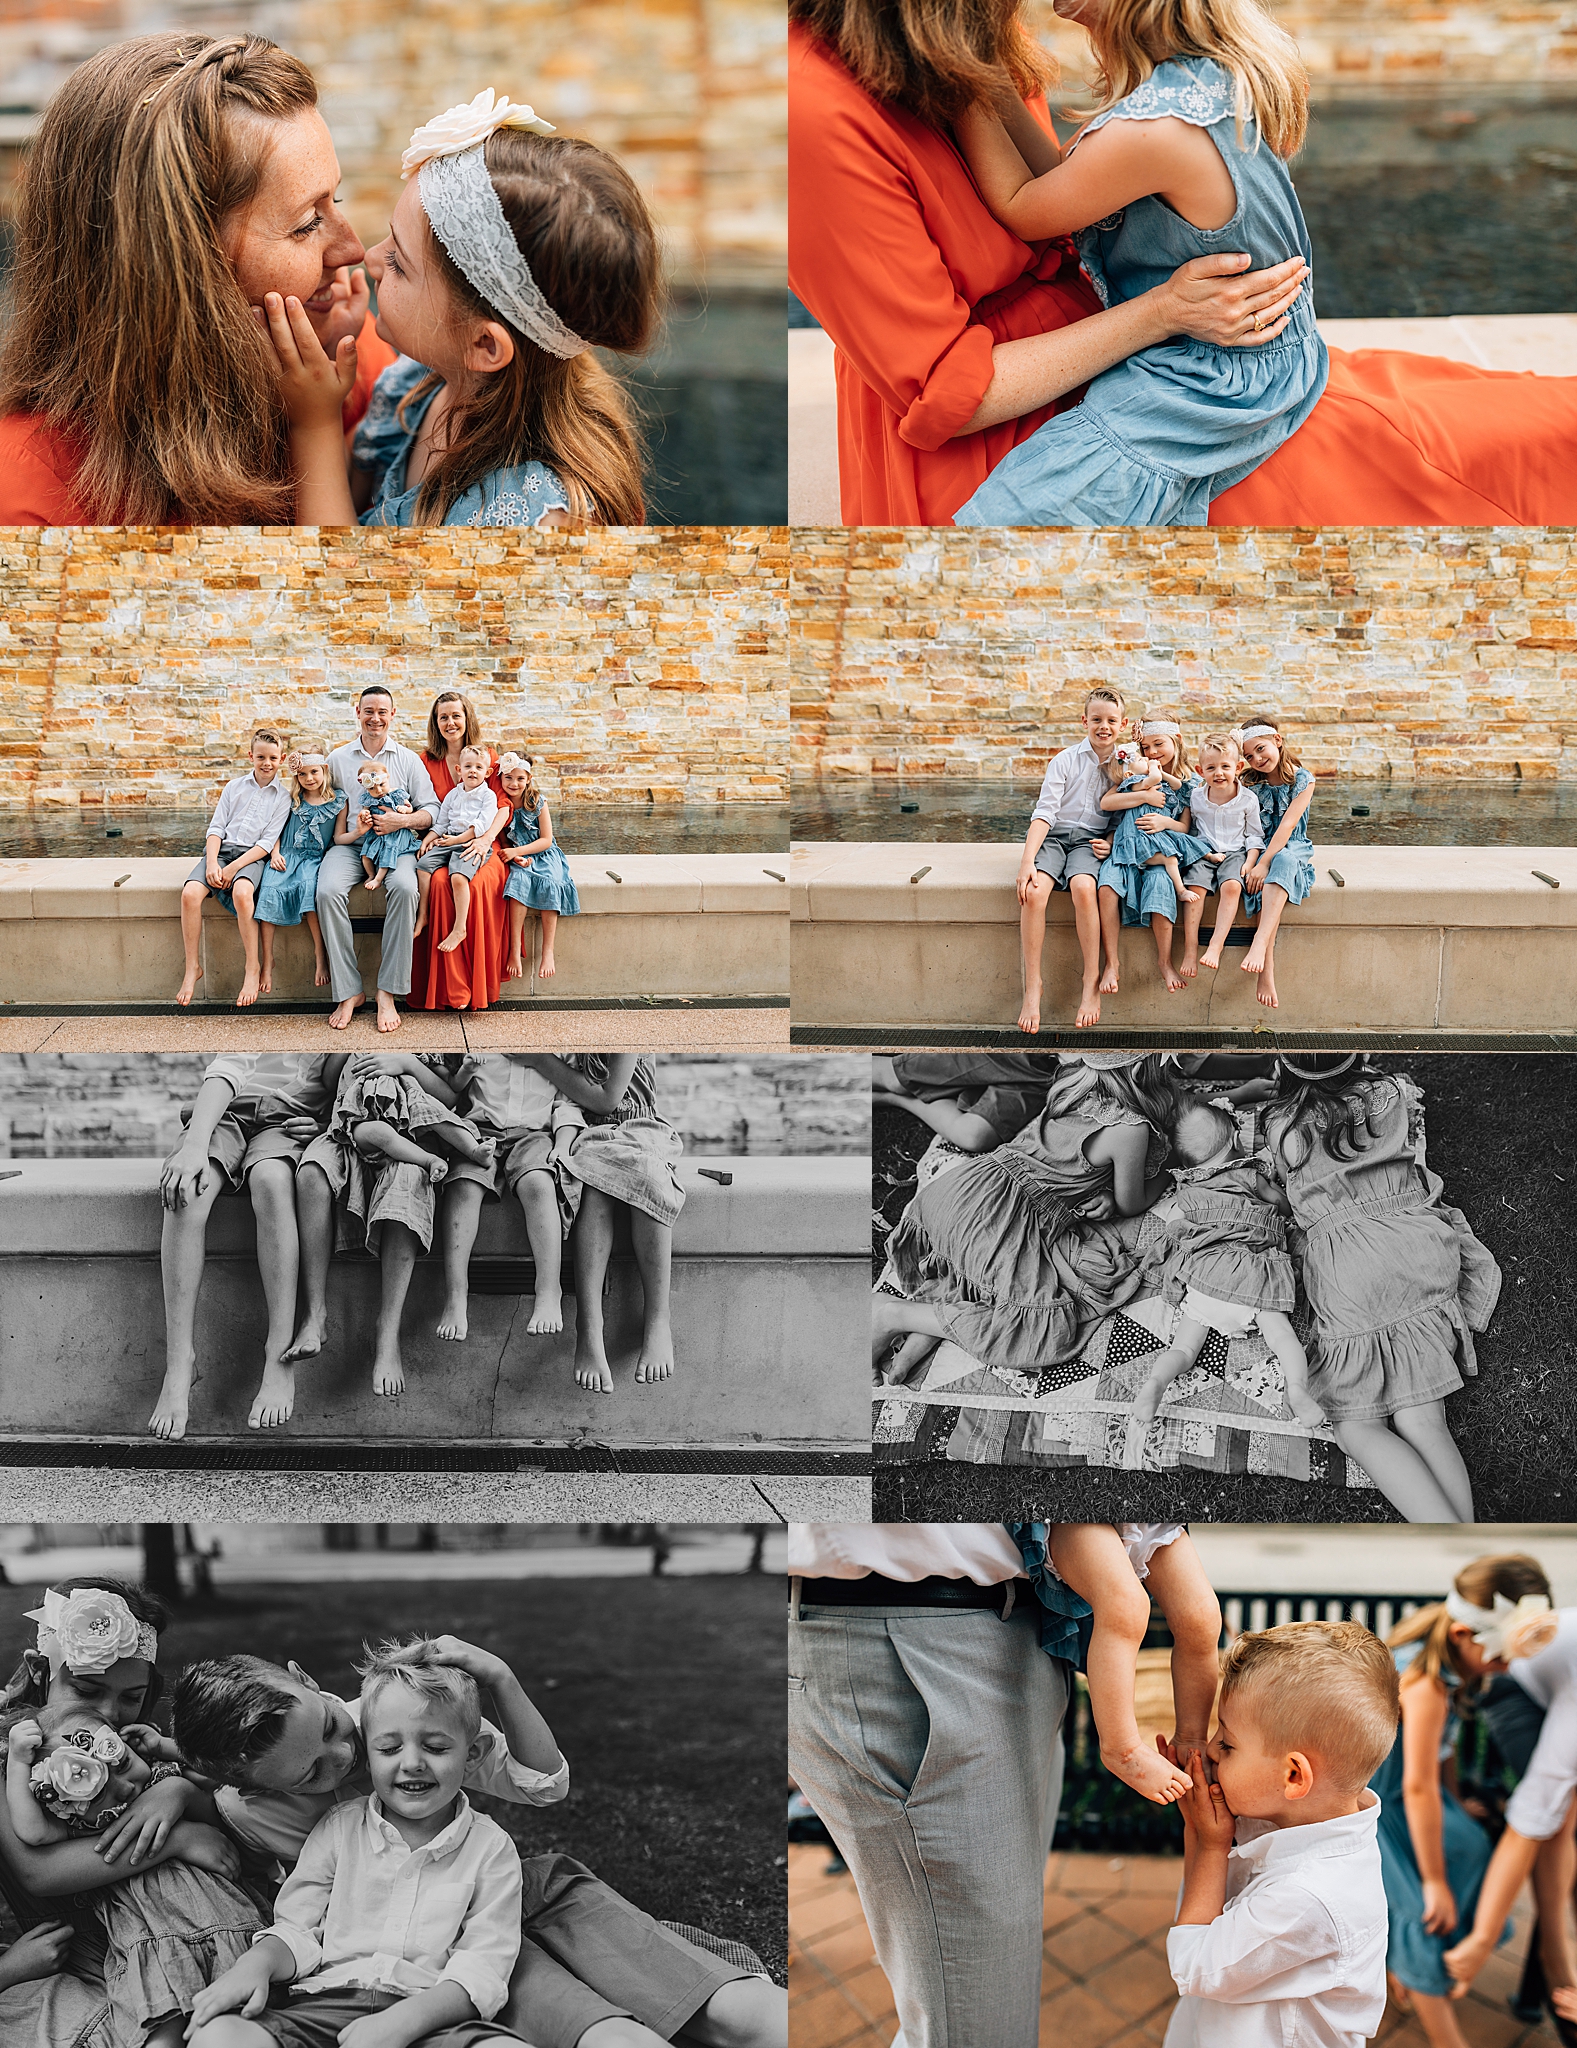 woodlands-waterway-family-session-lifestyle-red-dress-denim-skirts